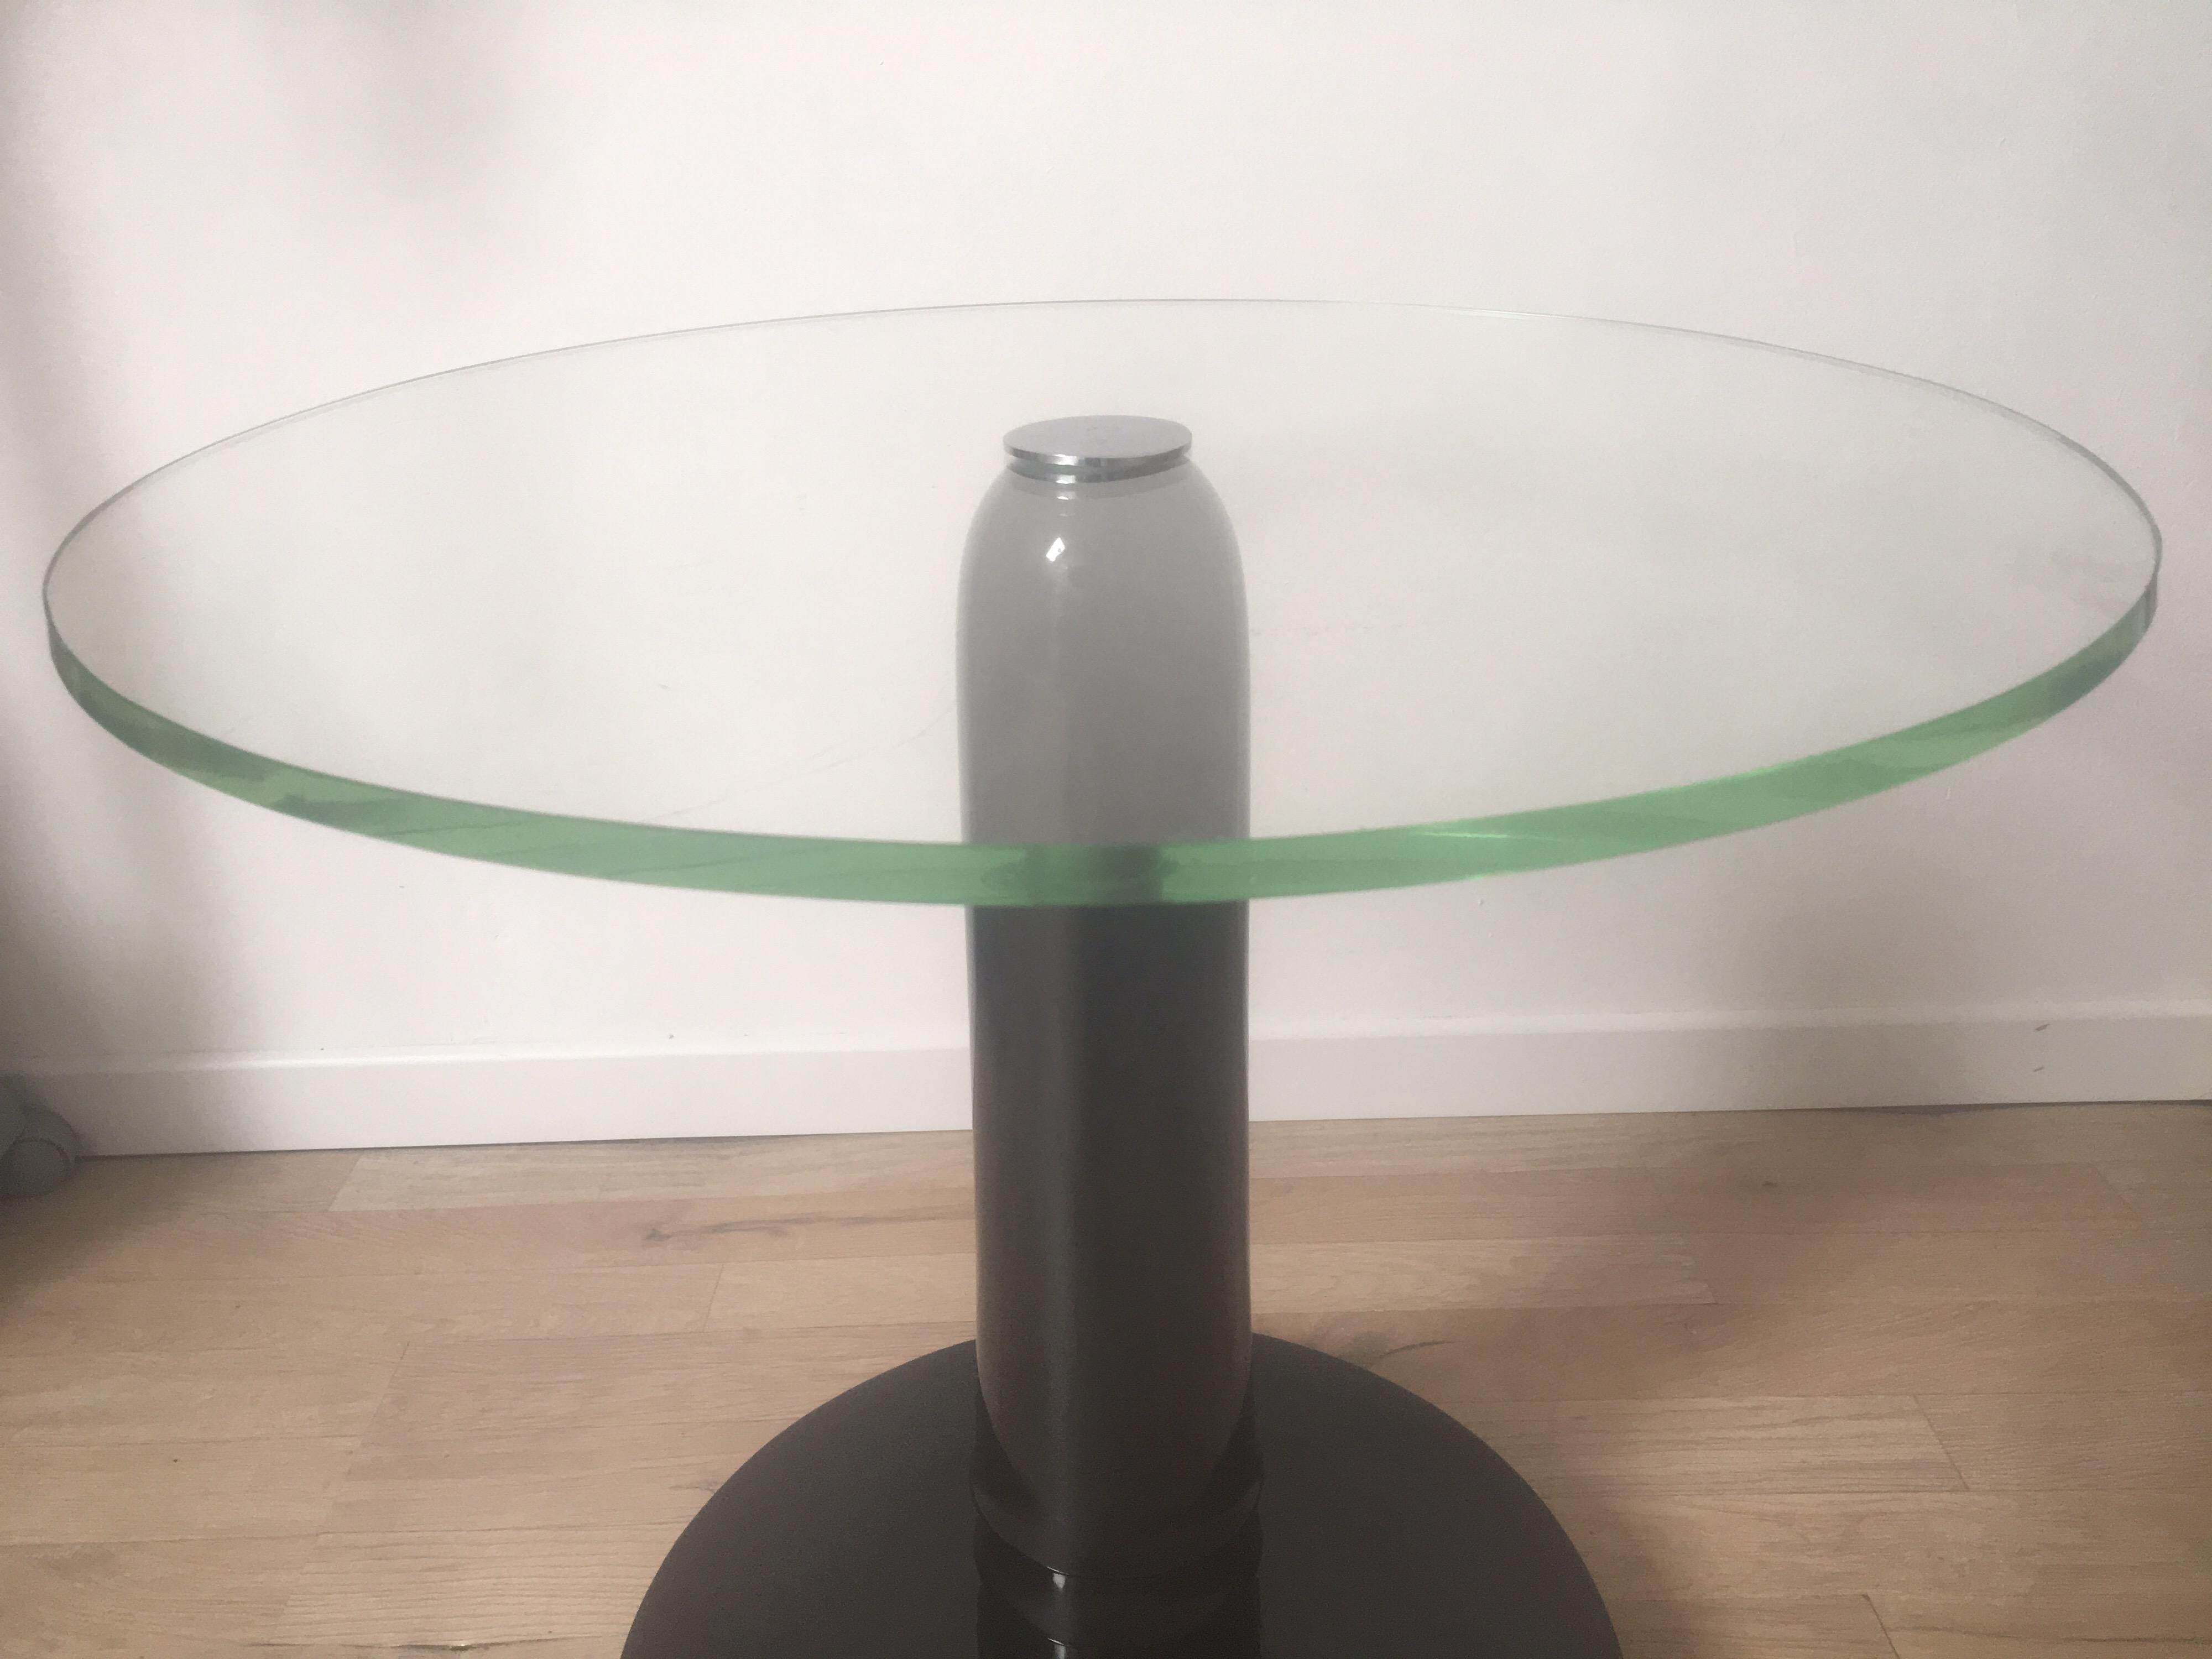 Art Deco René Drouet Brown Lacquer Wood Coffee Table, Circular Glass Slab Top, 1930 For Sale